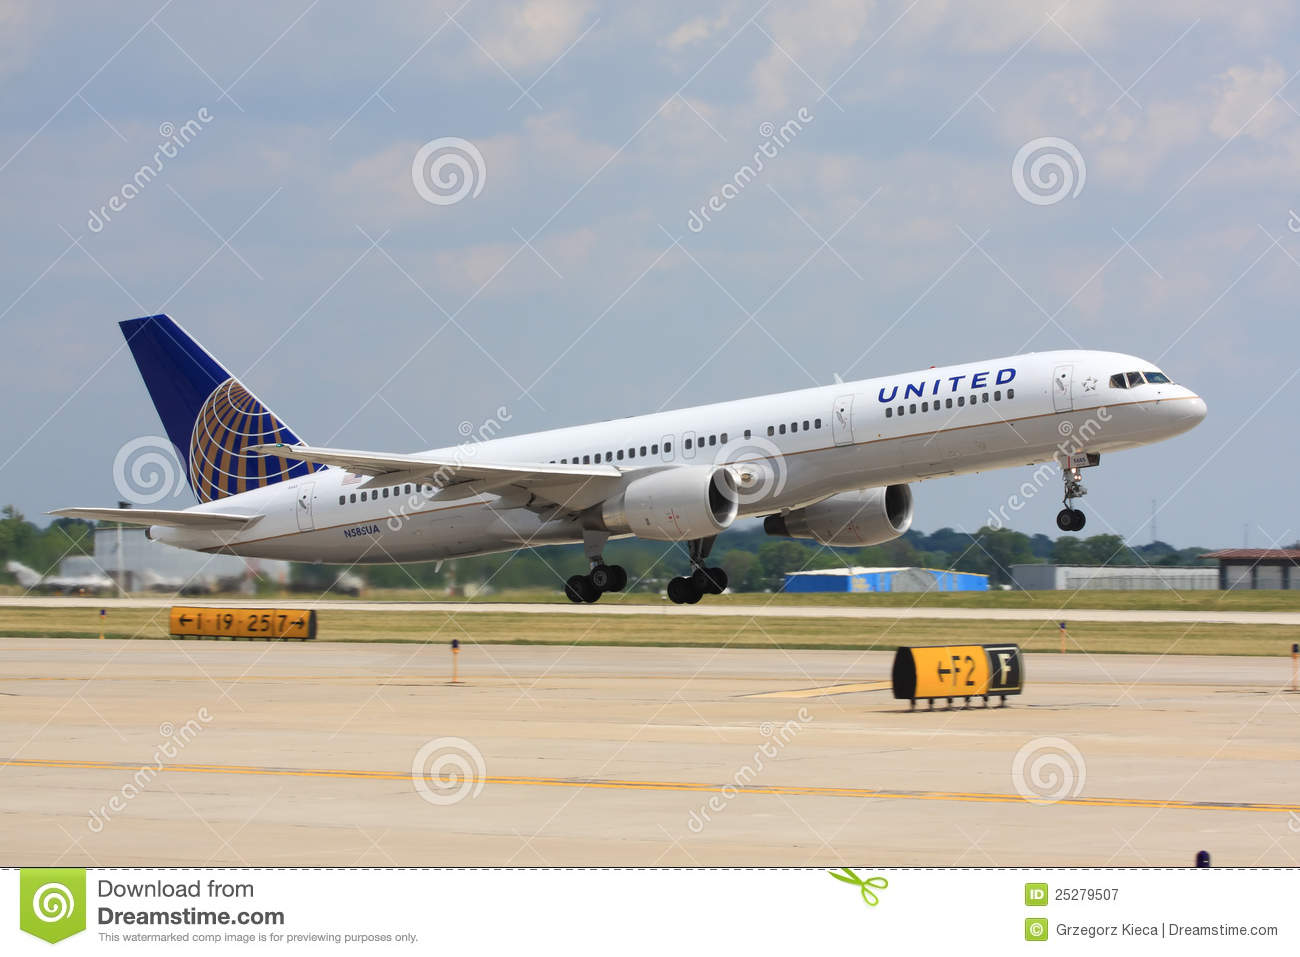 Passenger Aircraft United Airlines Boeing 757 Taking Off From Chicago